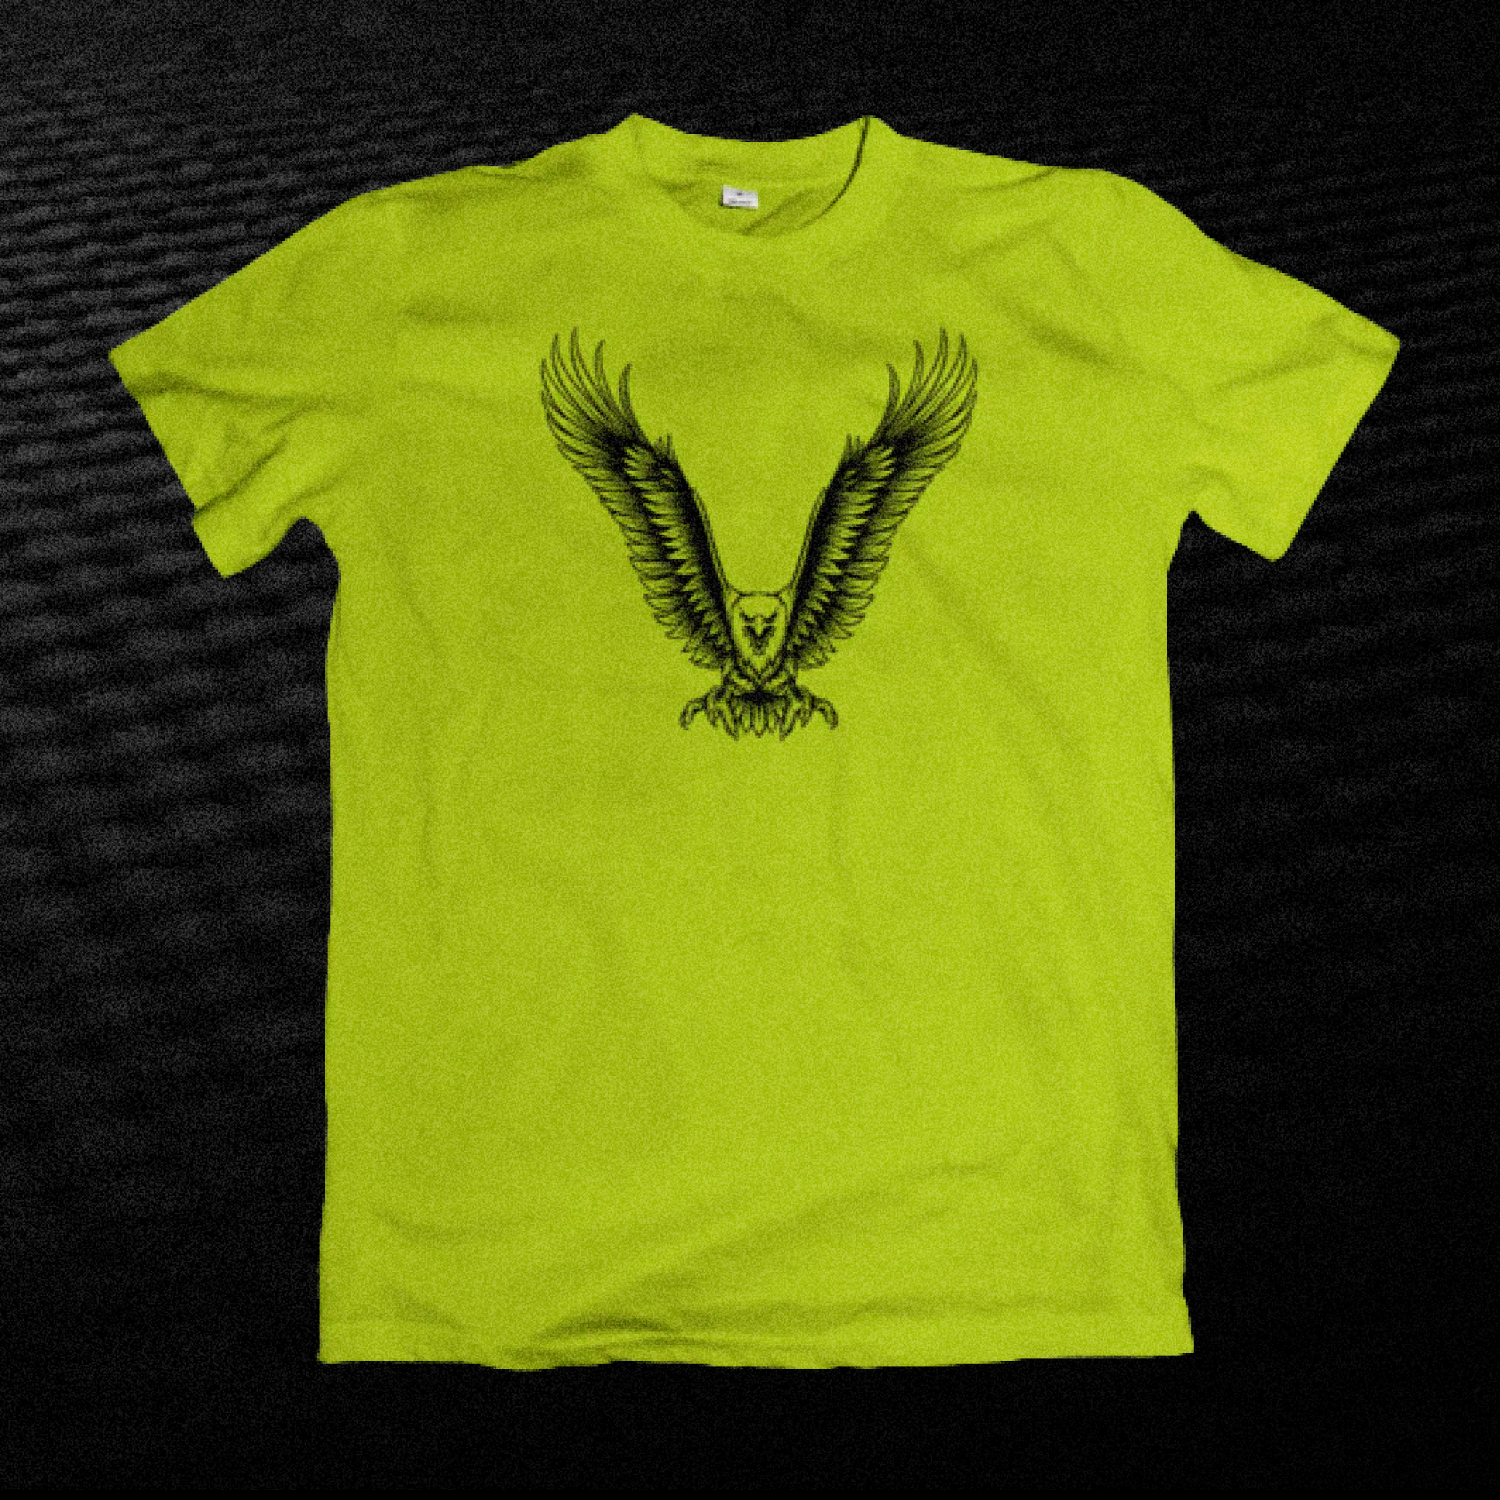 Yellow t - shirt with an eagle on it.